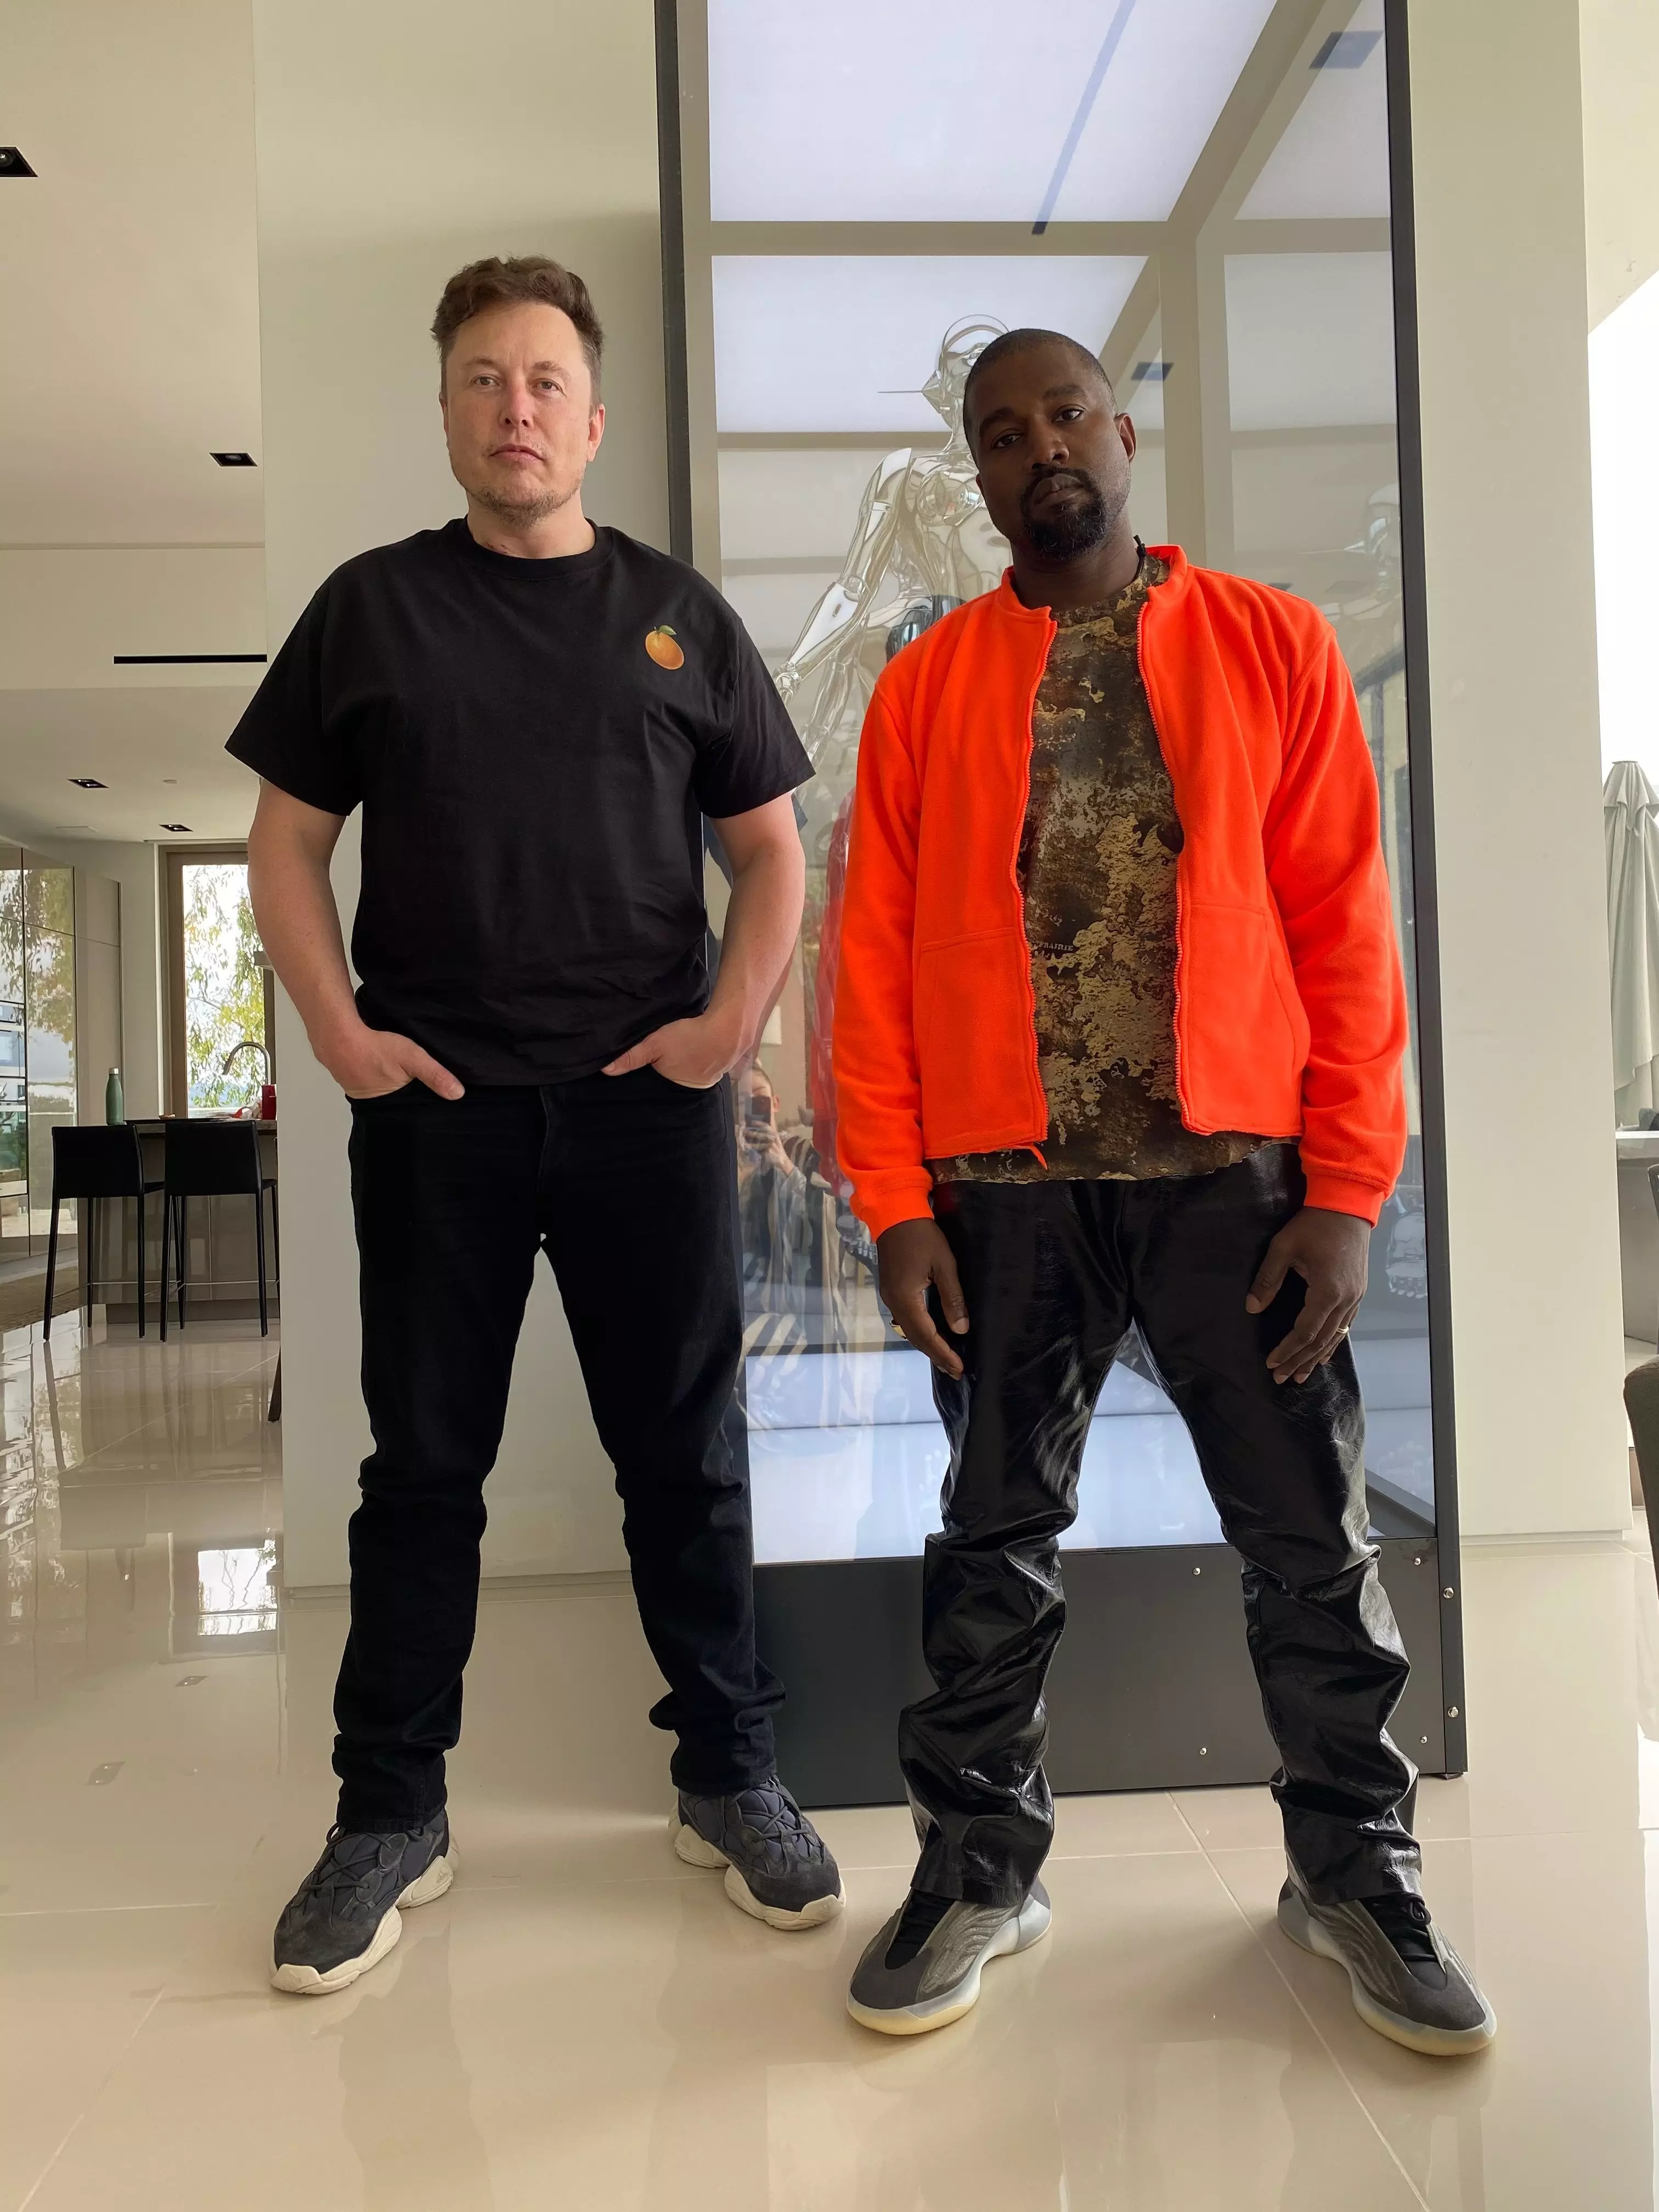 Kanye West has shared a picture of himself with Elon Musk.